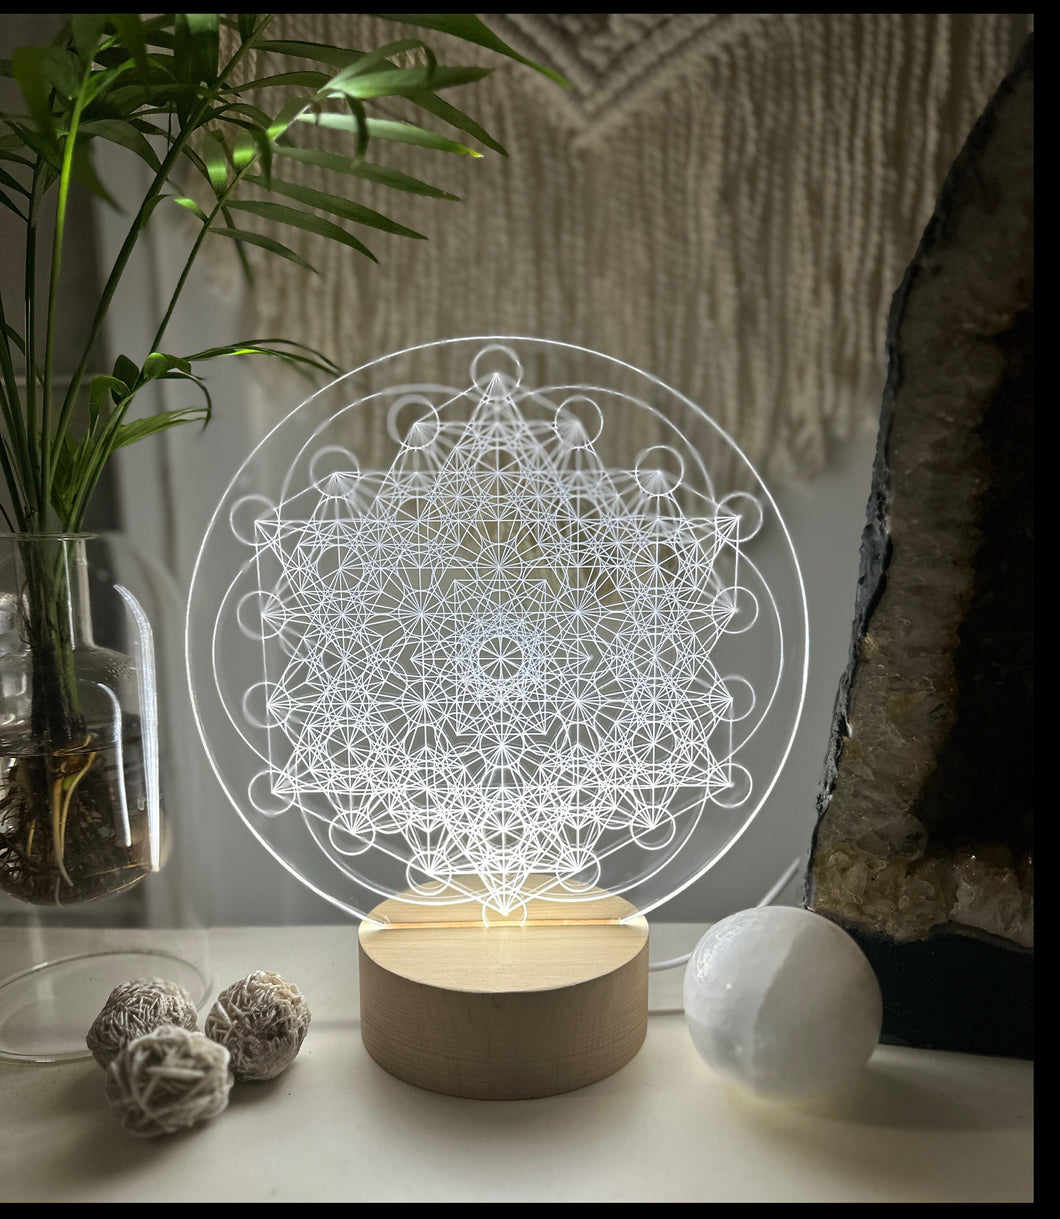 Variation Metatrons cube + seed of life - Small wooden led light base - universal usb connections